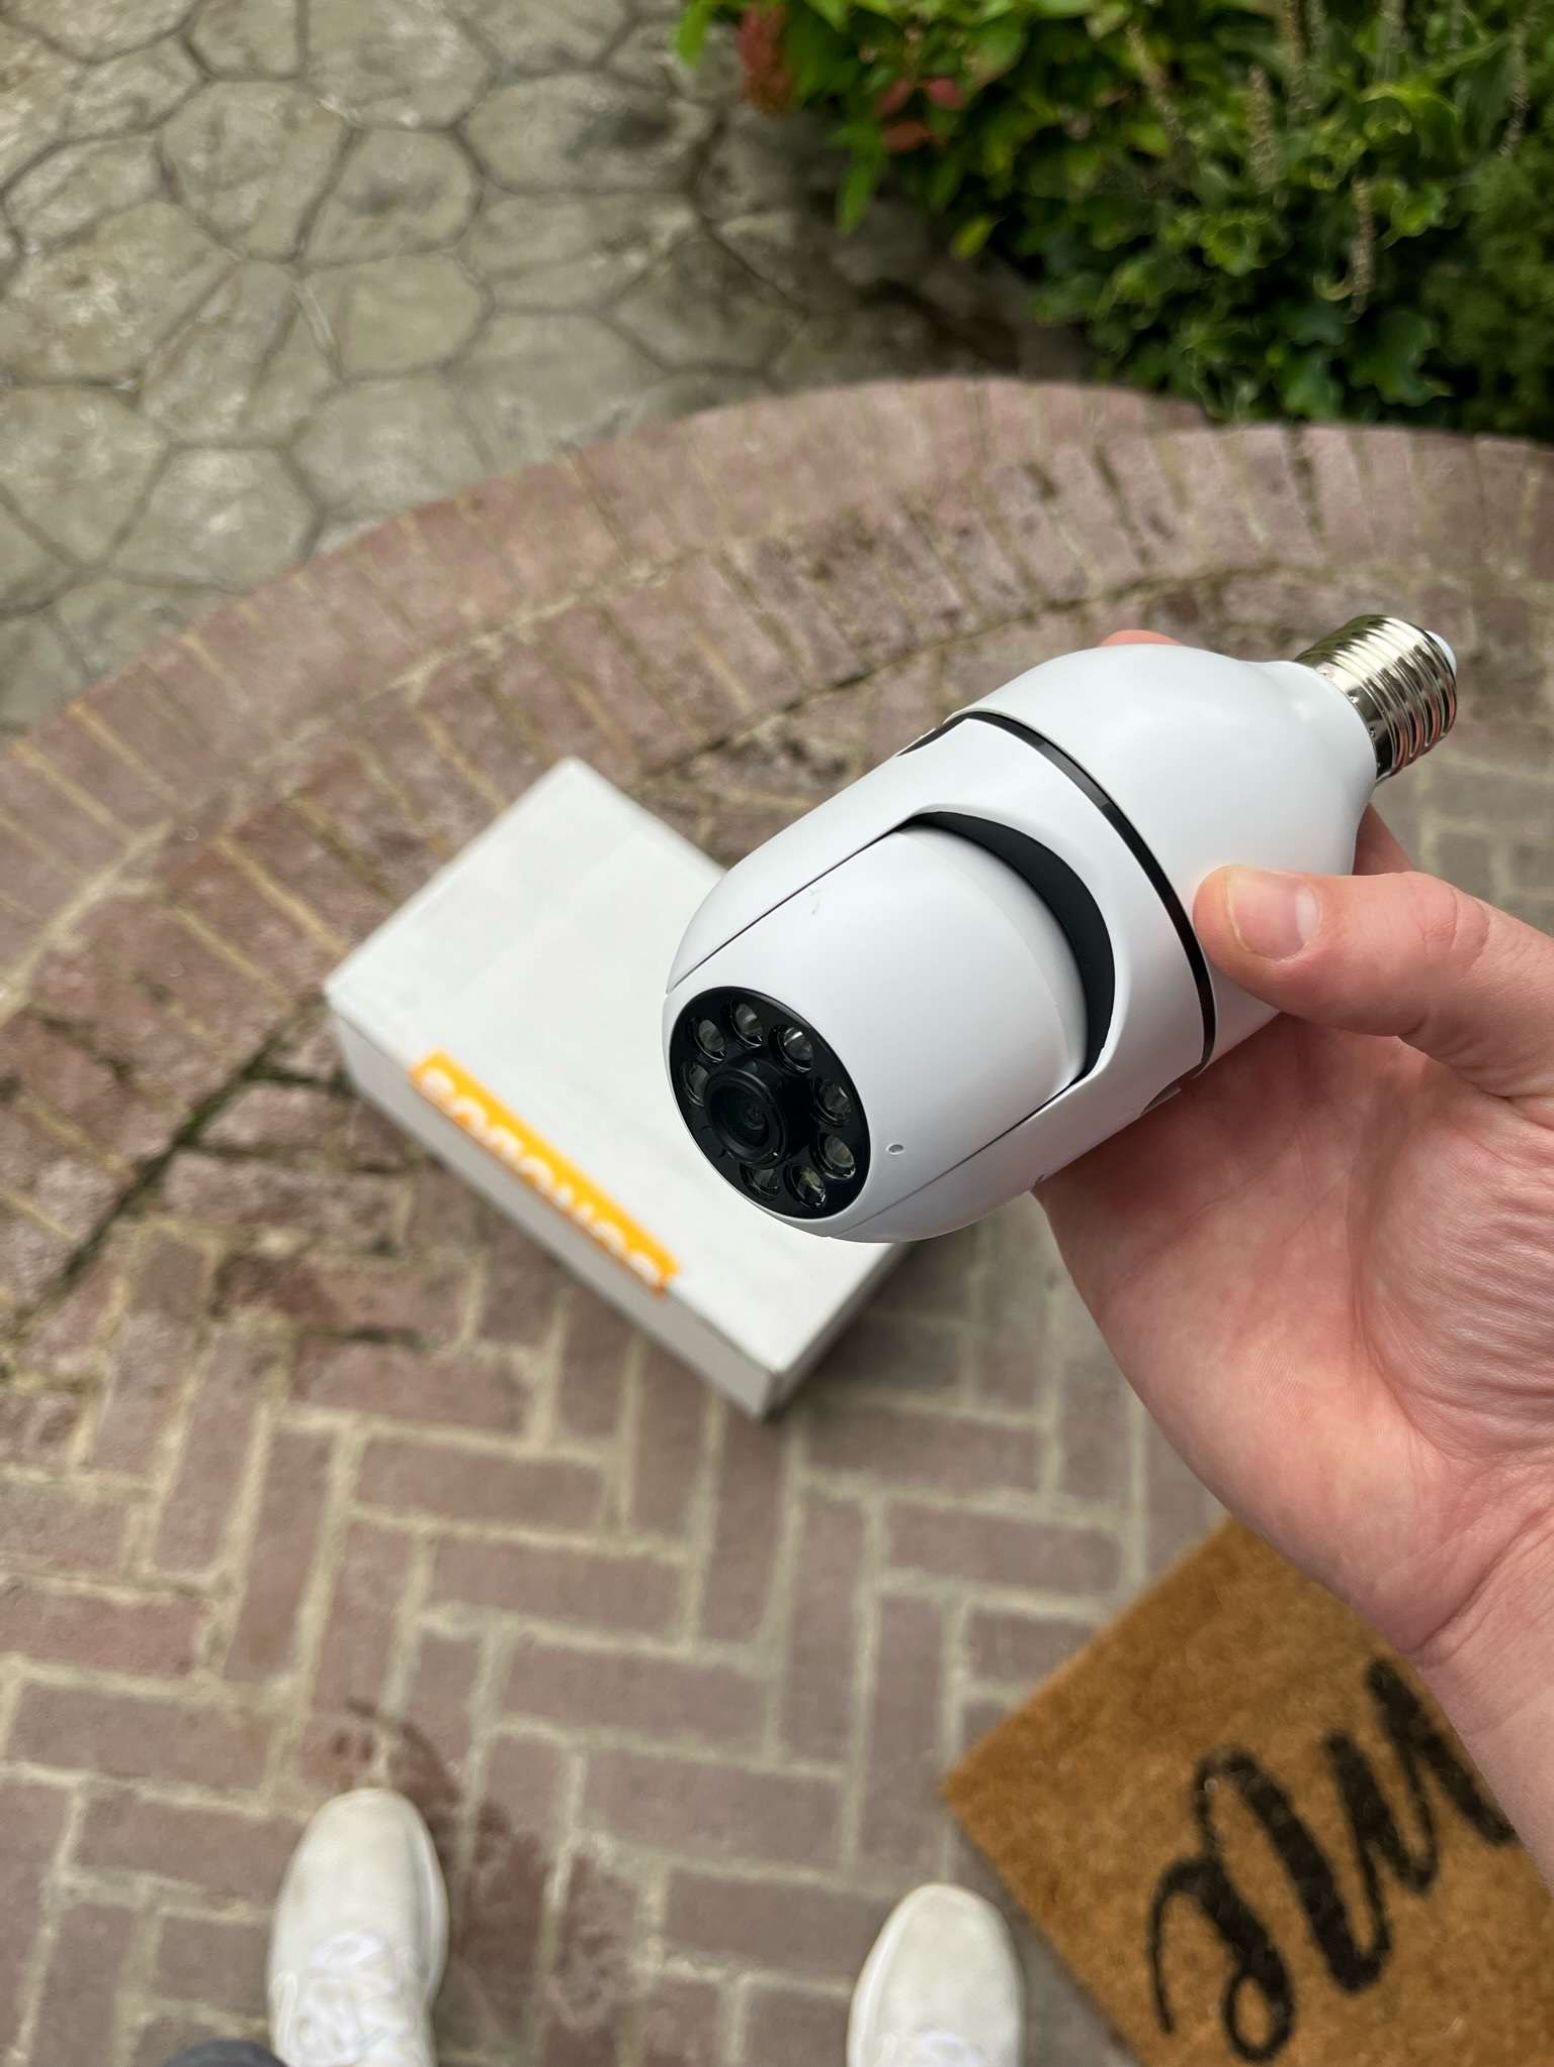 Good Price For Nomad Security Camera